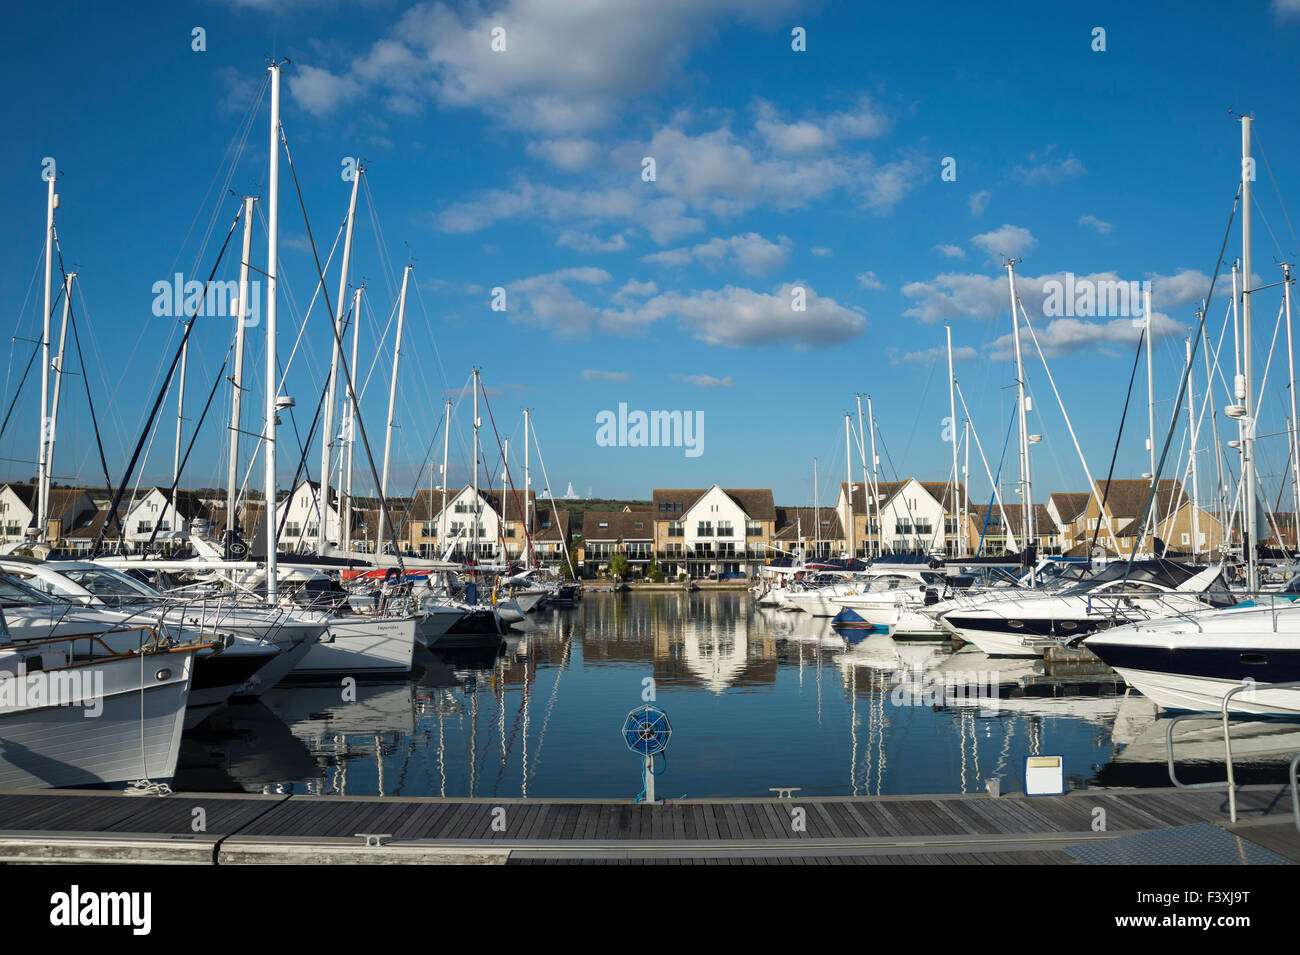 Yachts moored in Port Solent, luxury marina and houses. Stock Photo